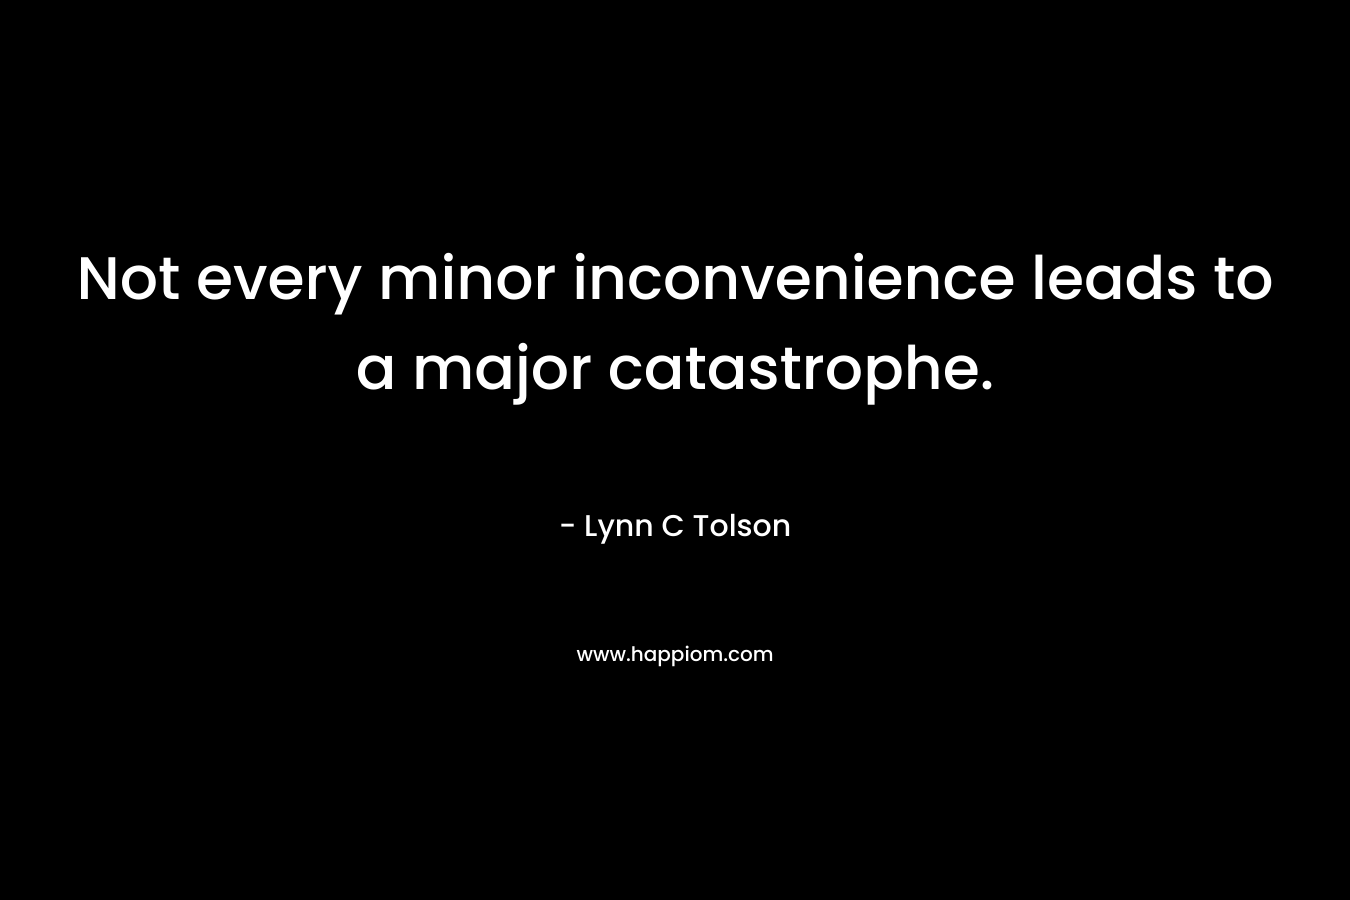 Not every minor inconvenience leads to a major catastrophe. – Lynn C Tolson